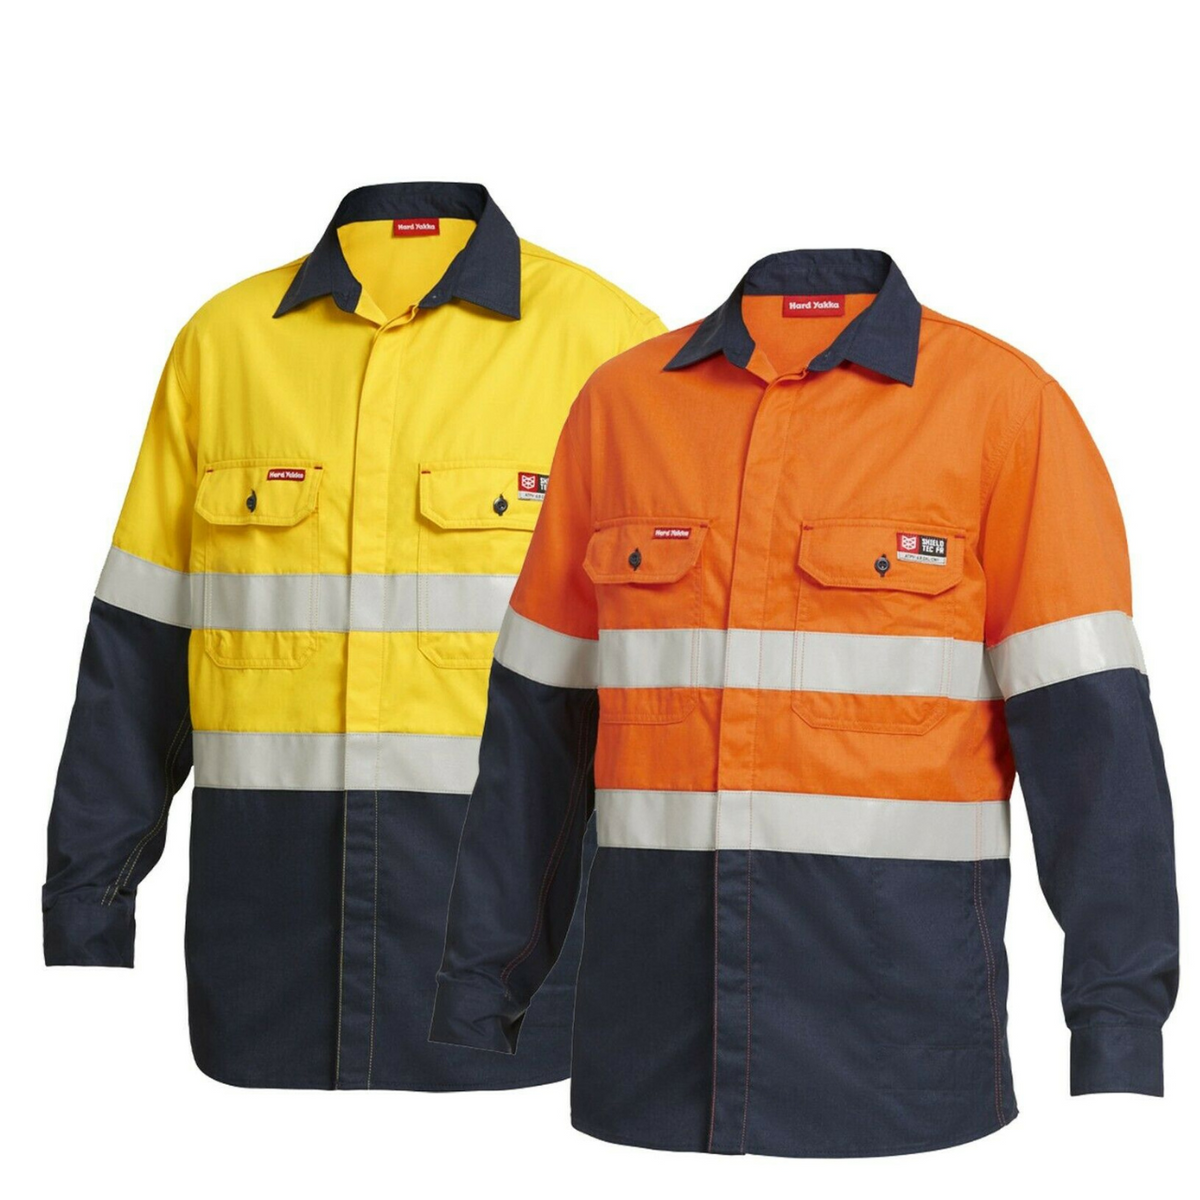 Mens Hard Yakka Protect Mining Work Hi-Vis Fire Resistant Safety Shirt Y04350-Collins Clothing Co